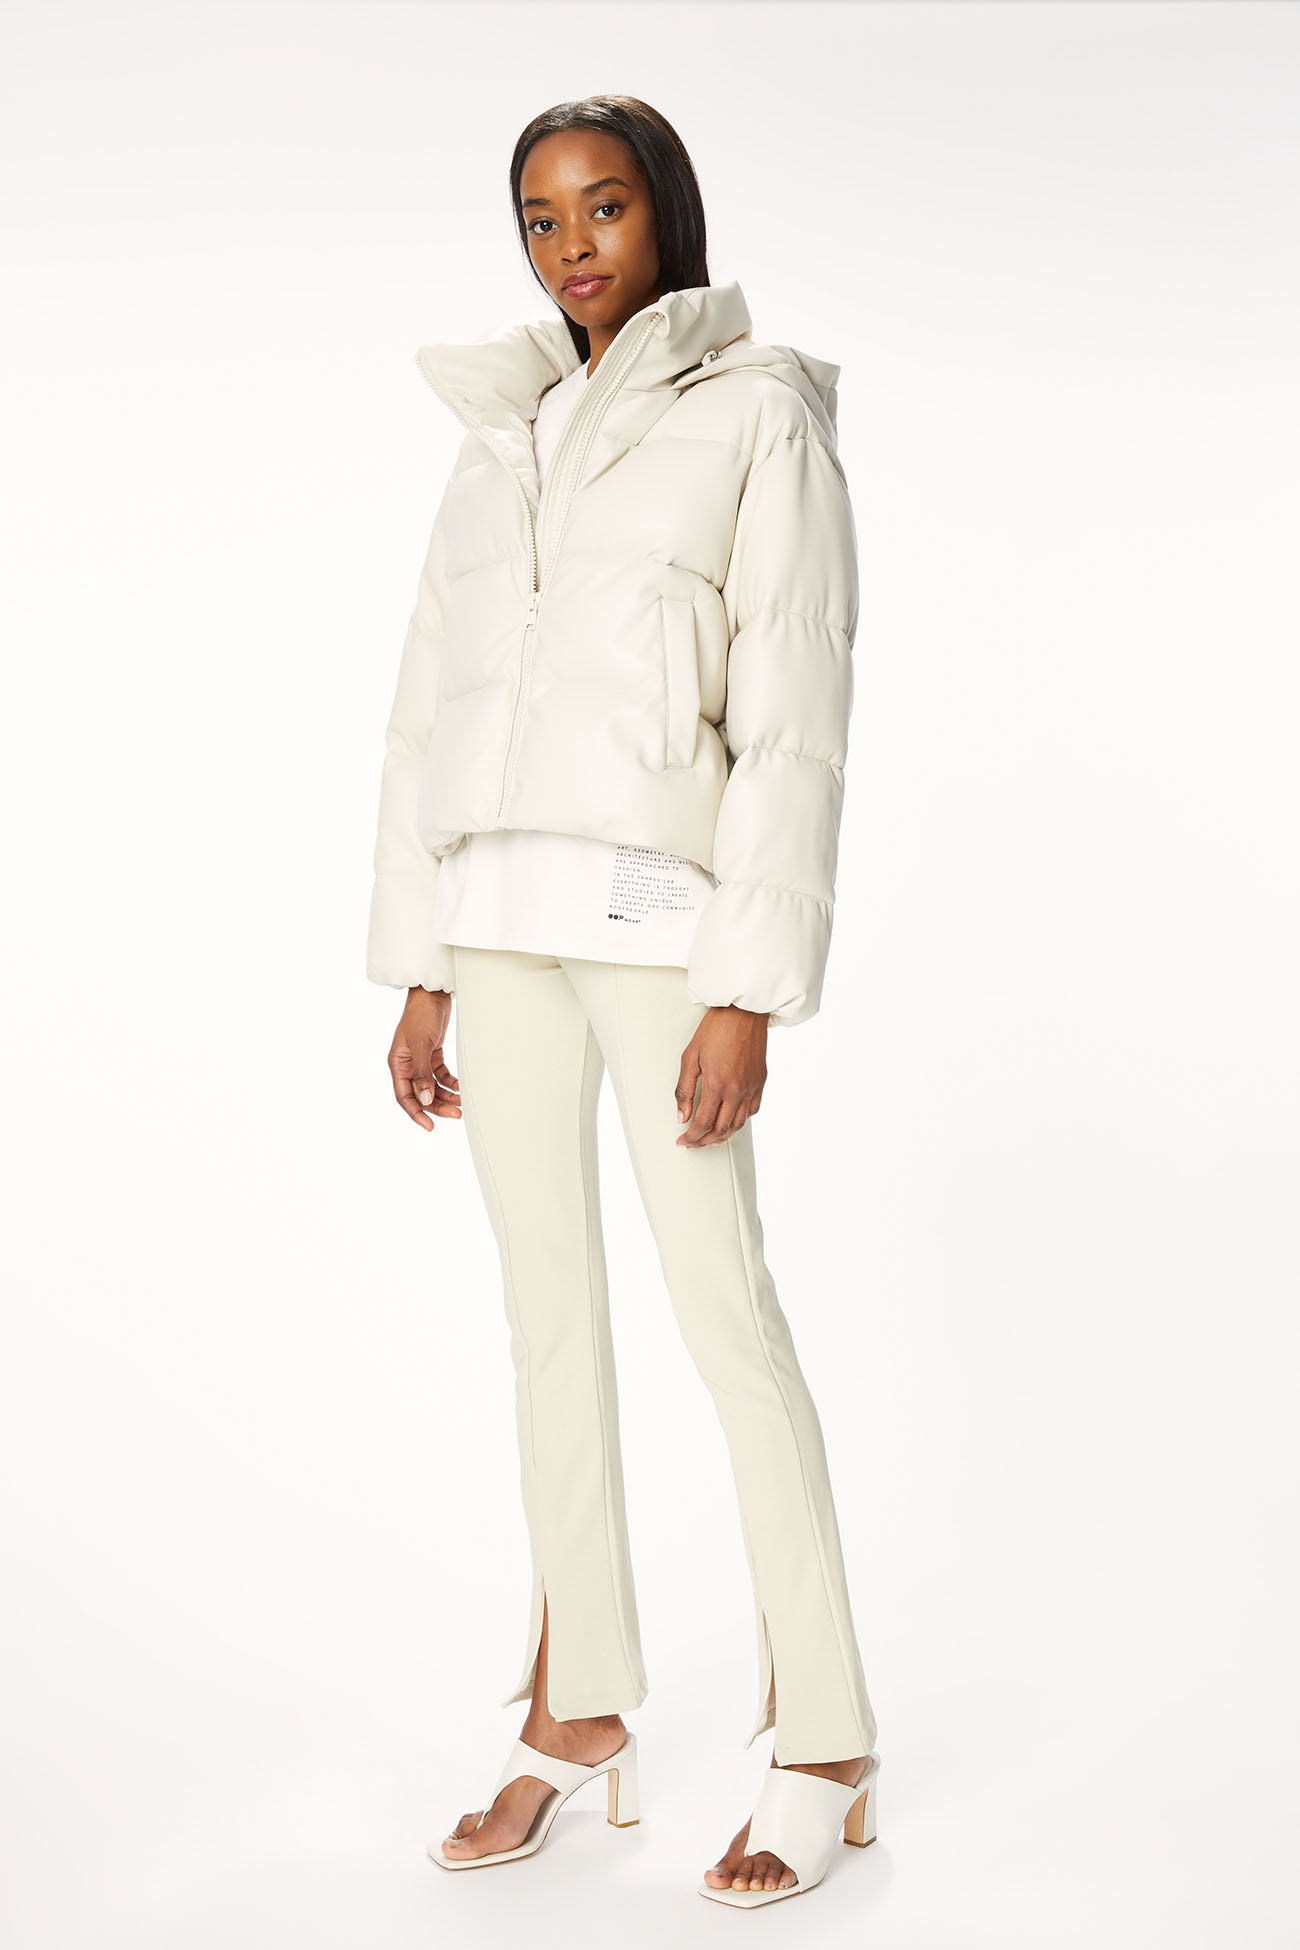 JACKET 9200 MADE IN ECO LEATHER - NATURAL WHITE - OOF WEAR